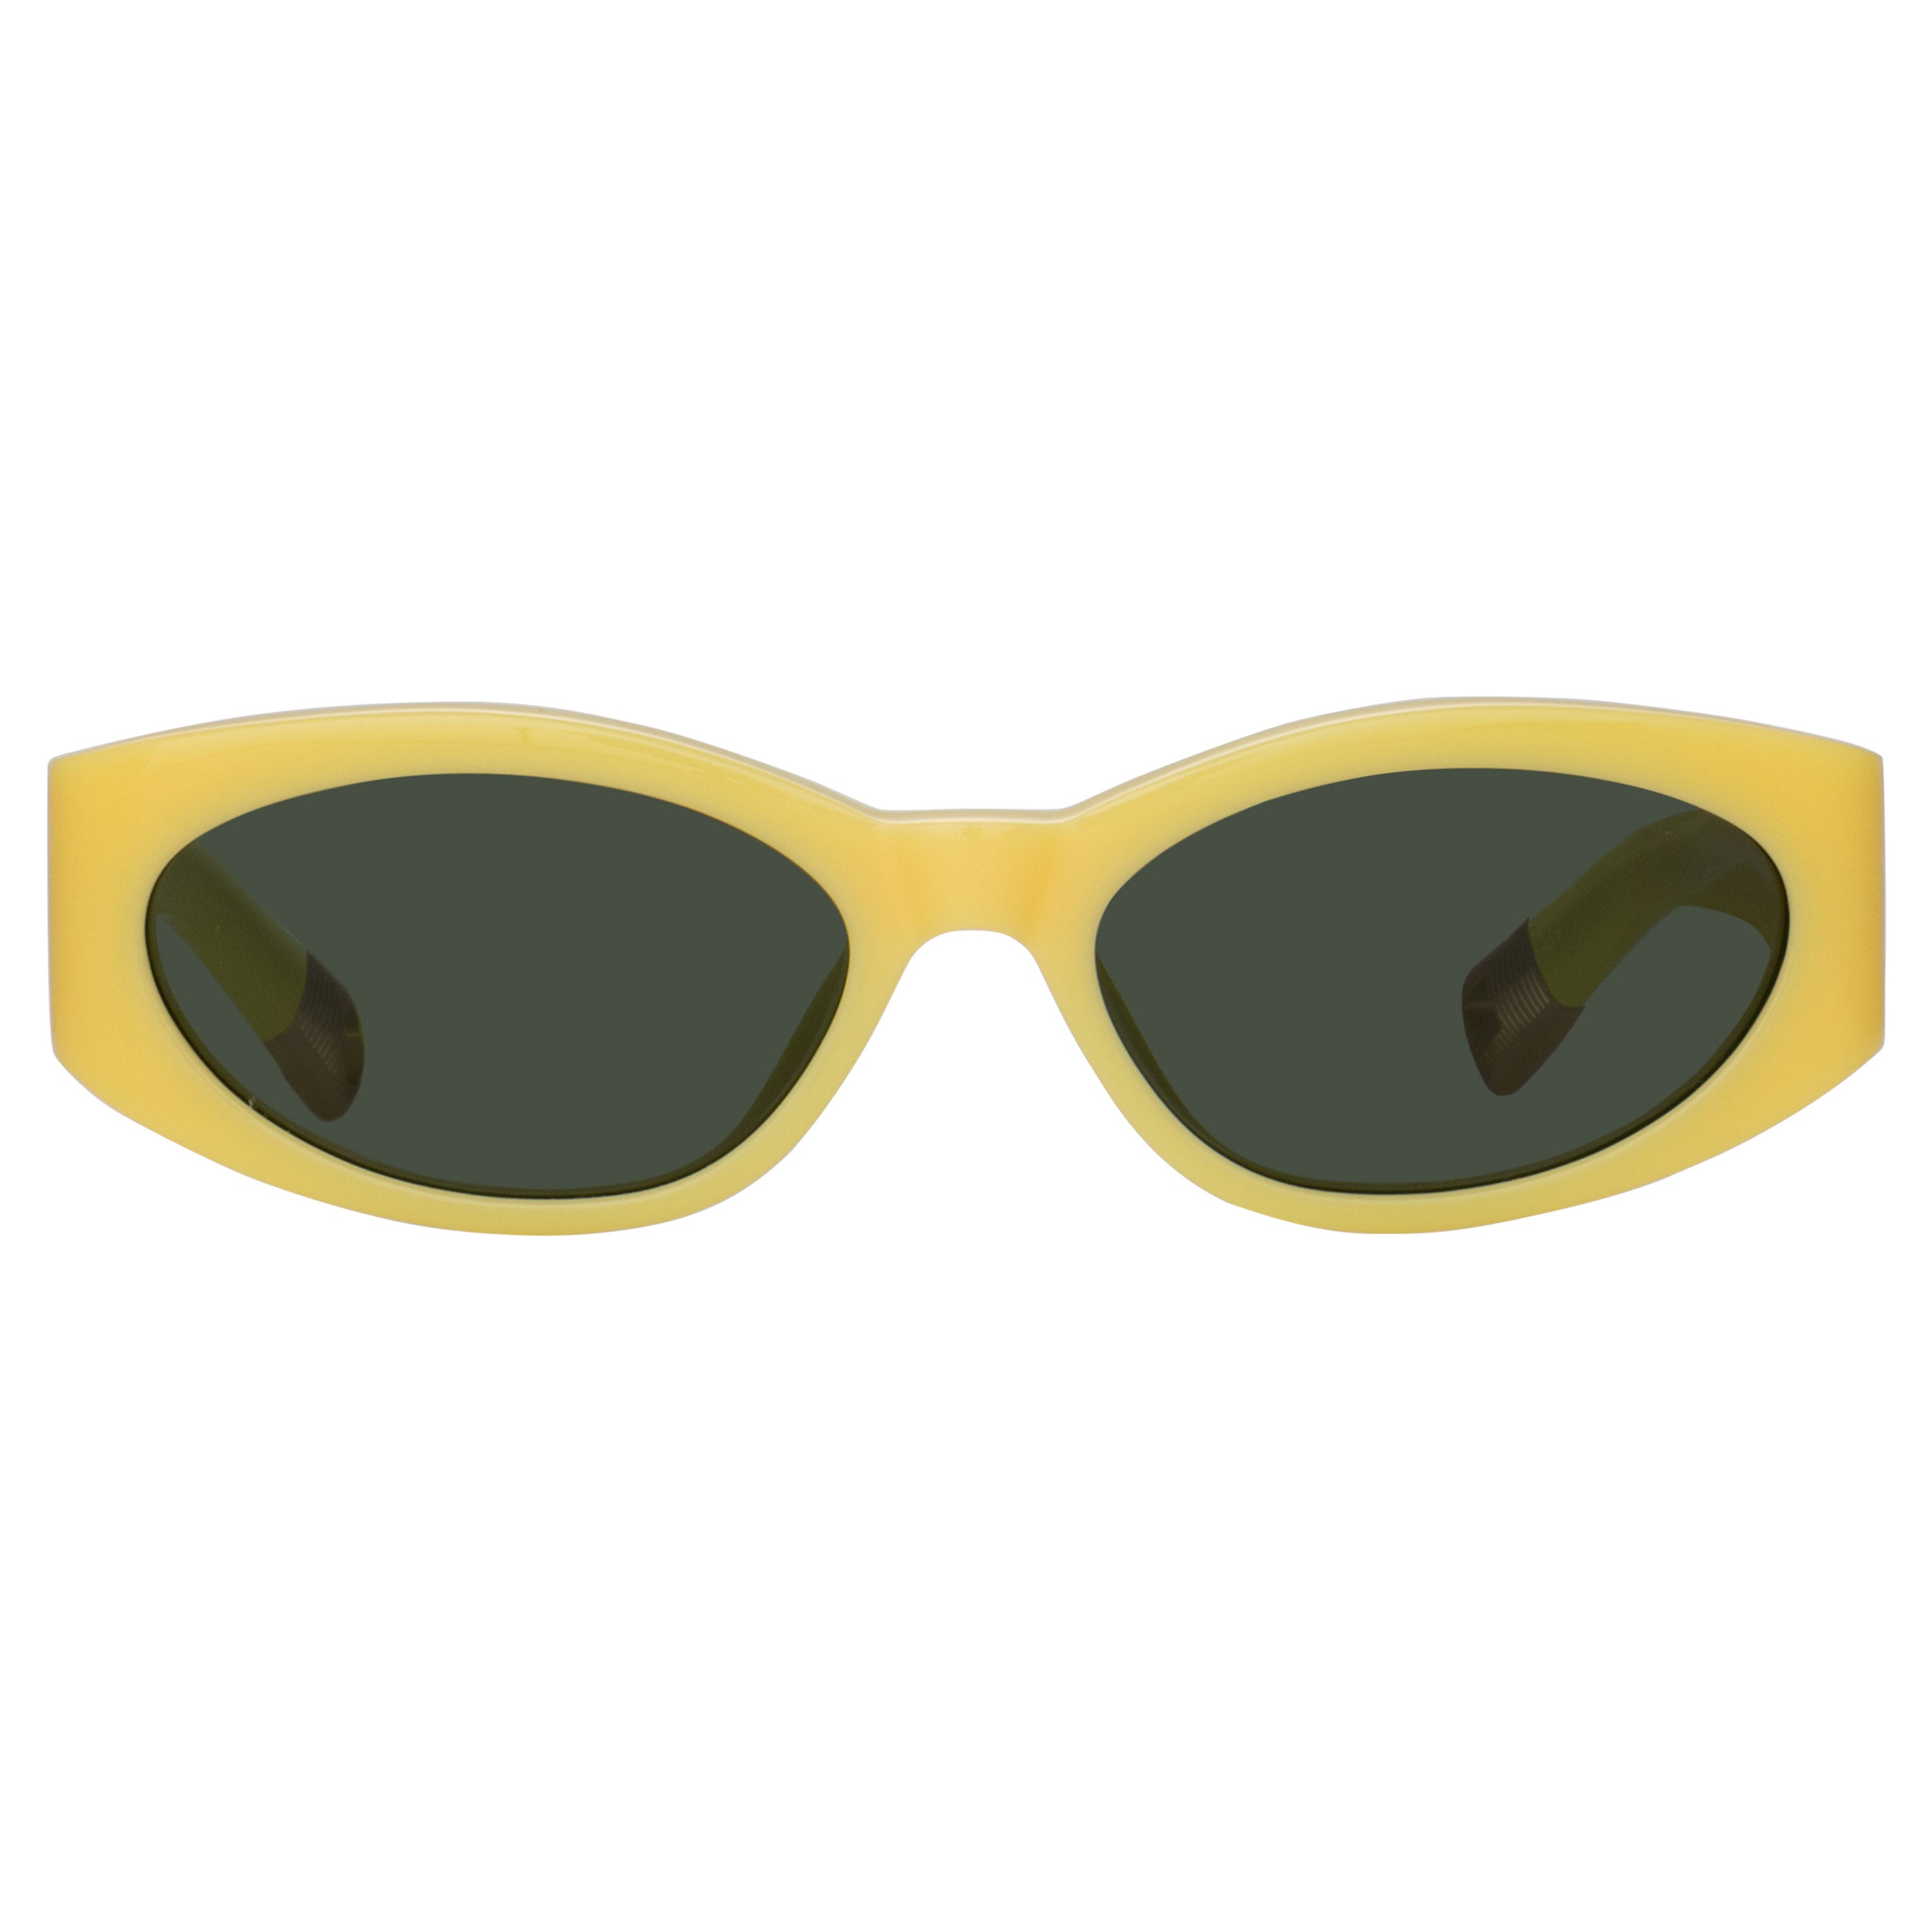 Ovalo Oval Sunglasses in Yellow by Jacquemus